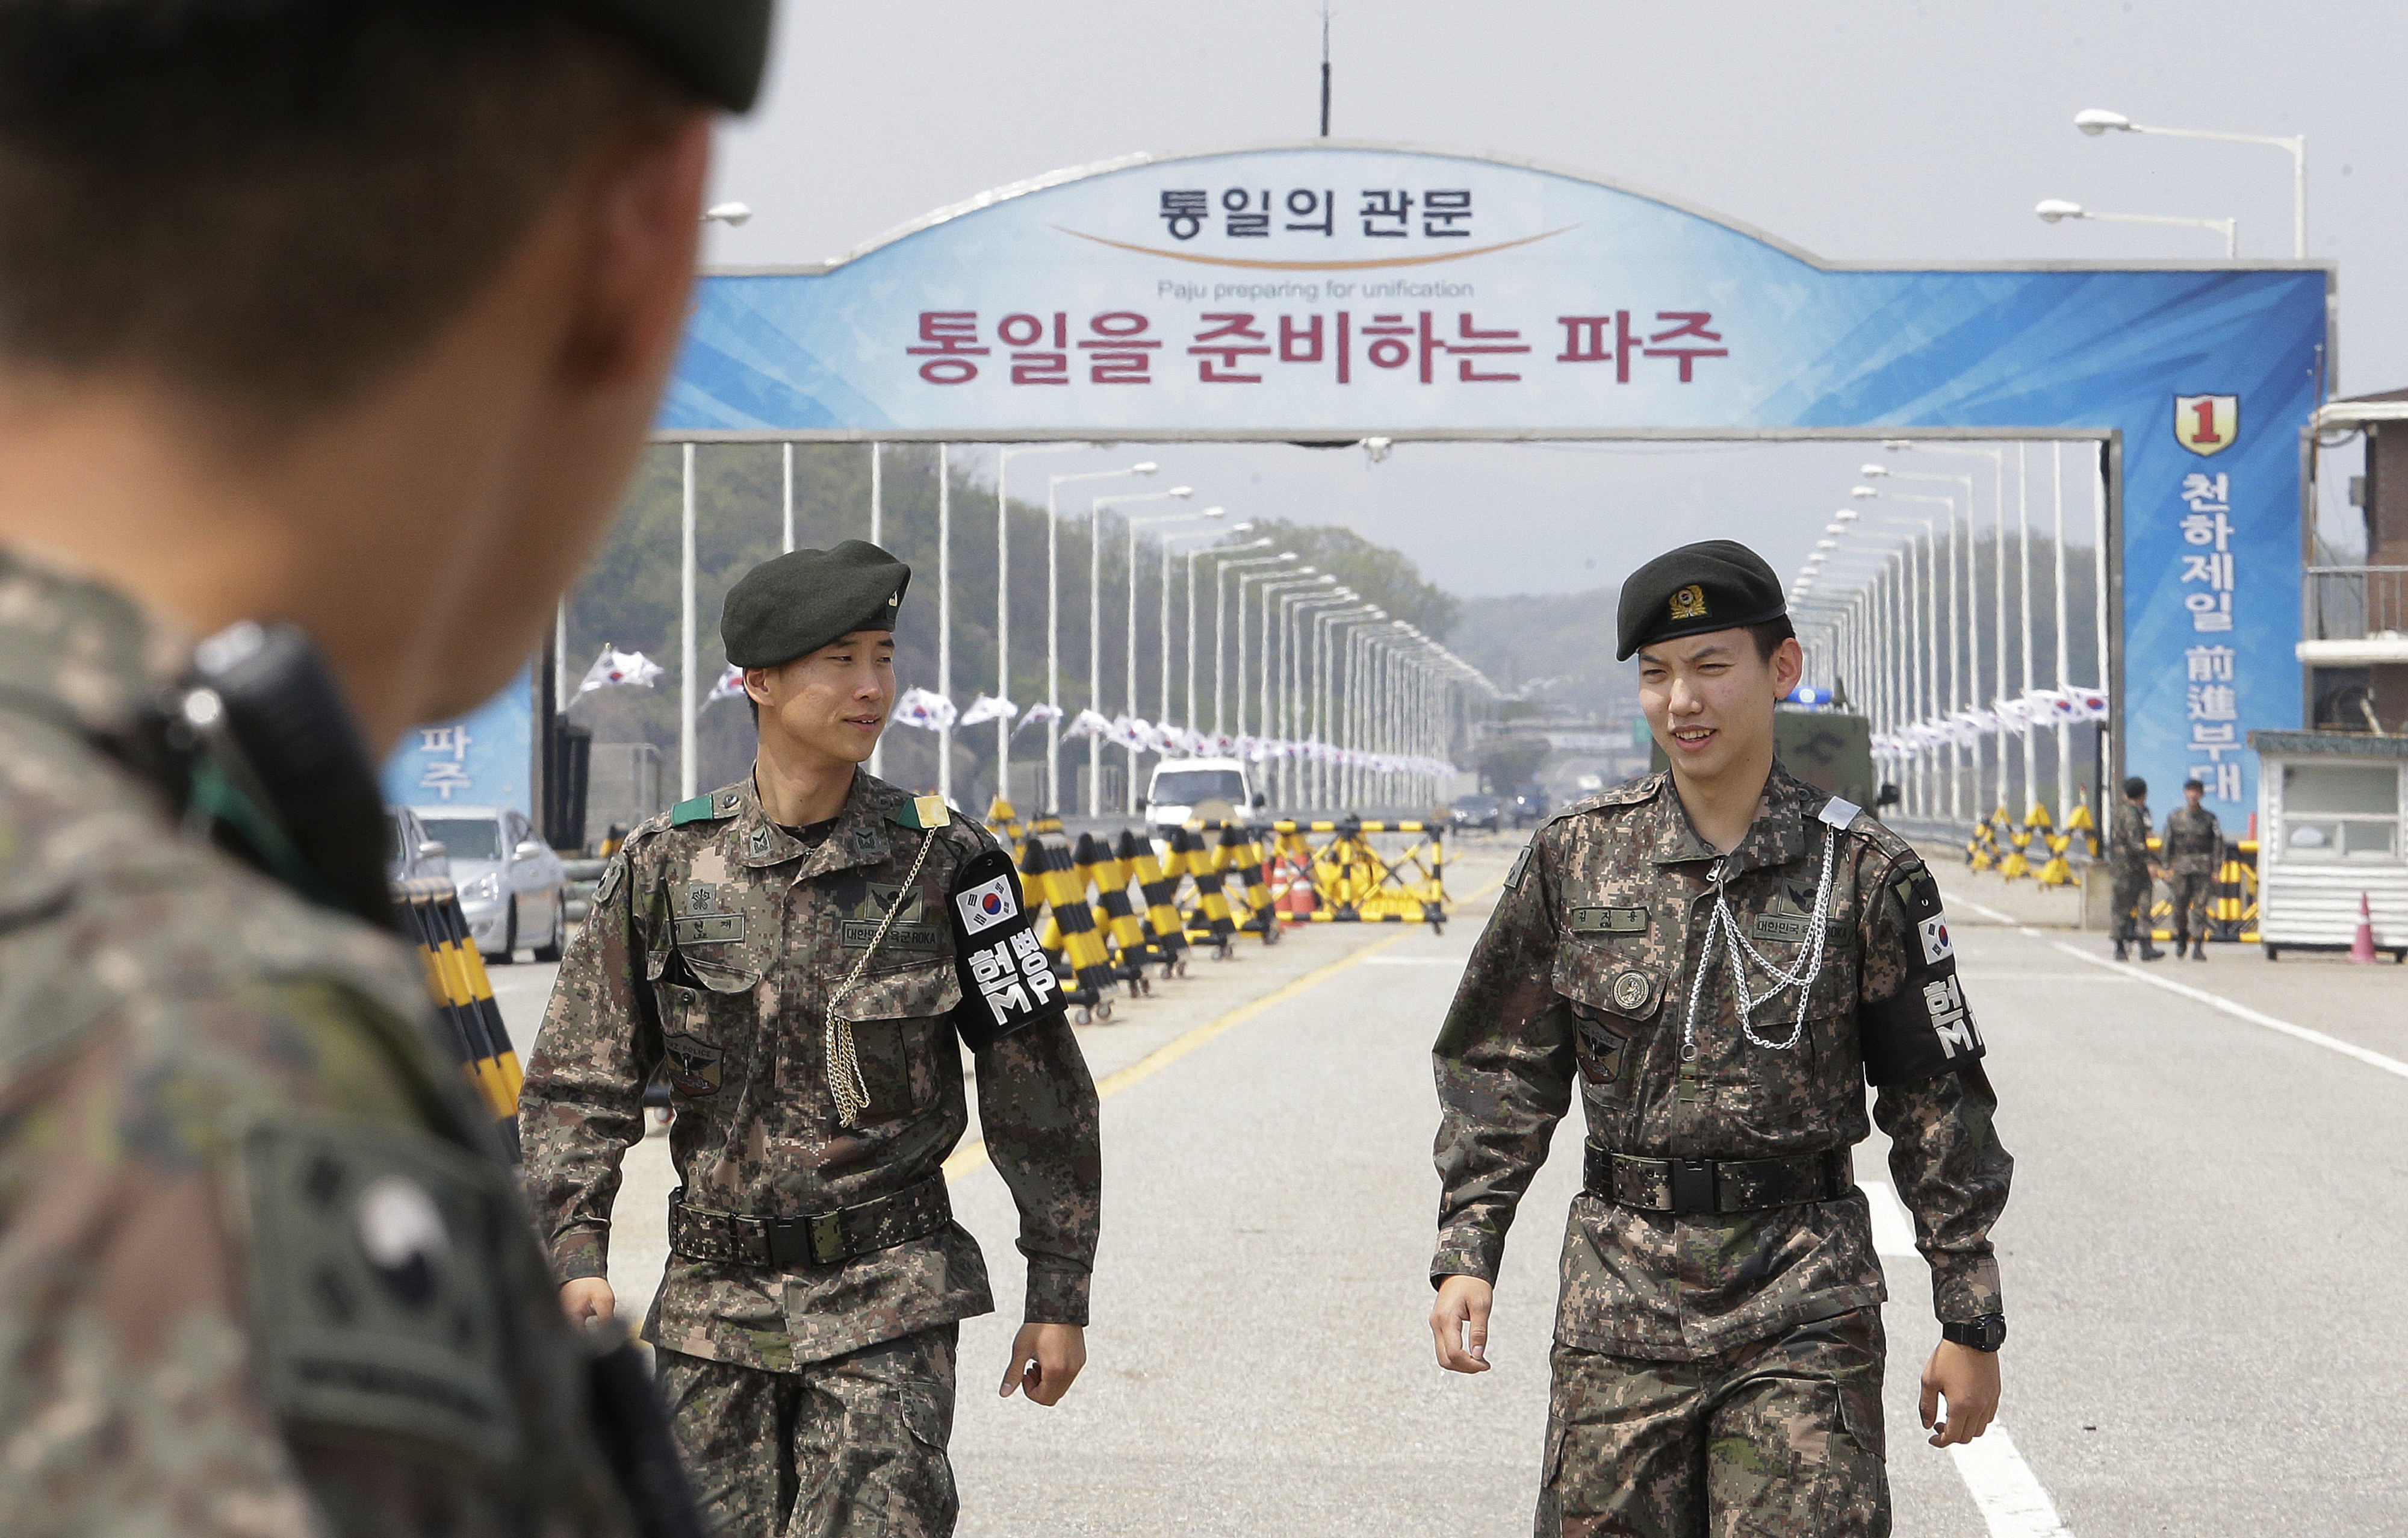 South Korean army soldiers patrol at Unification Bridge, which leads to Panmunjom in Paju, South Korea, Thursday, April 26, 2018. North Korean leader Kim Jong Un and South Korean President Moon-Jae-in will plant a commemorative tree and inspect an honor guard together after Kim walks across the border Friday for their historic summit, Seoul officials said Thursday. (AP Photo/Ahn Young-joon)